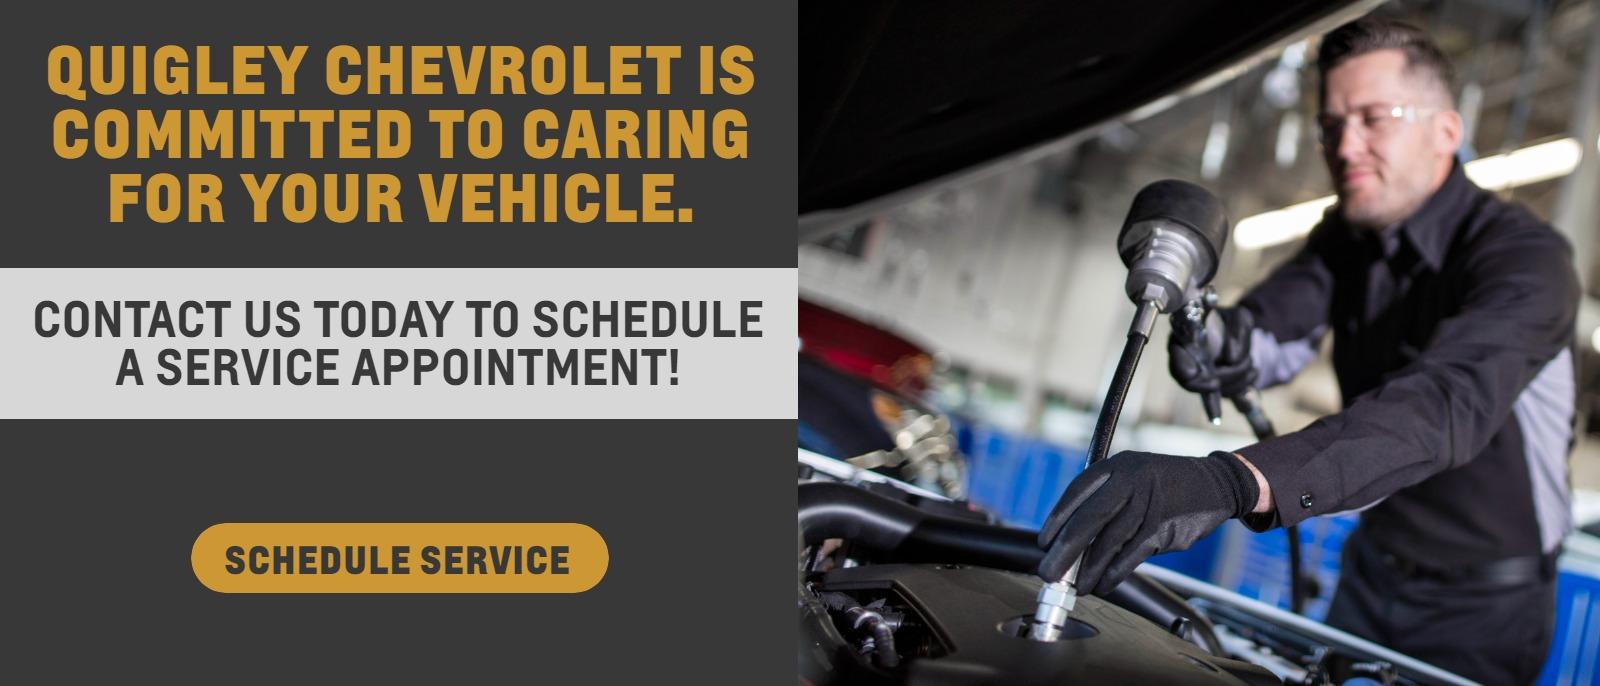 Quigley Chevrolet is committed to caring for your vehicle. Contact us today to schedule a service appointment!